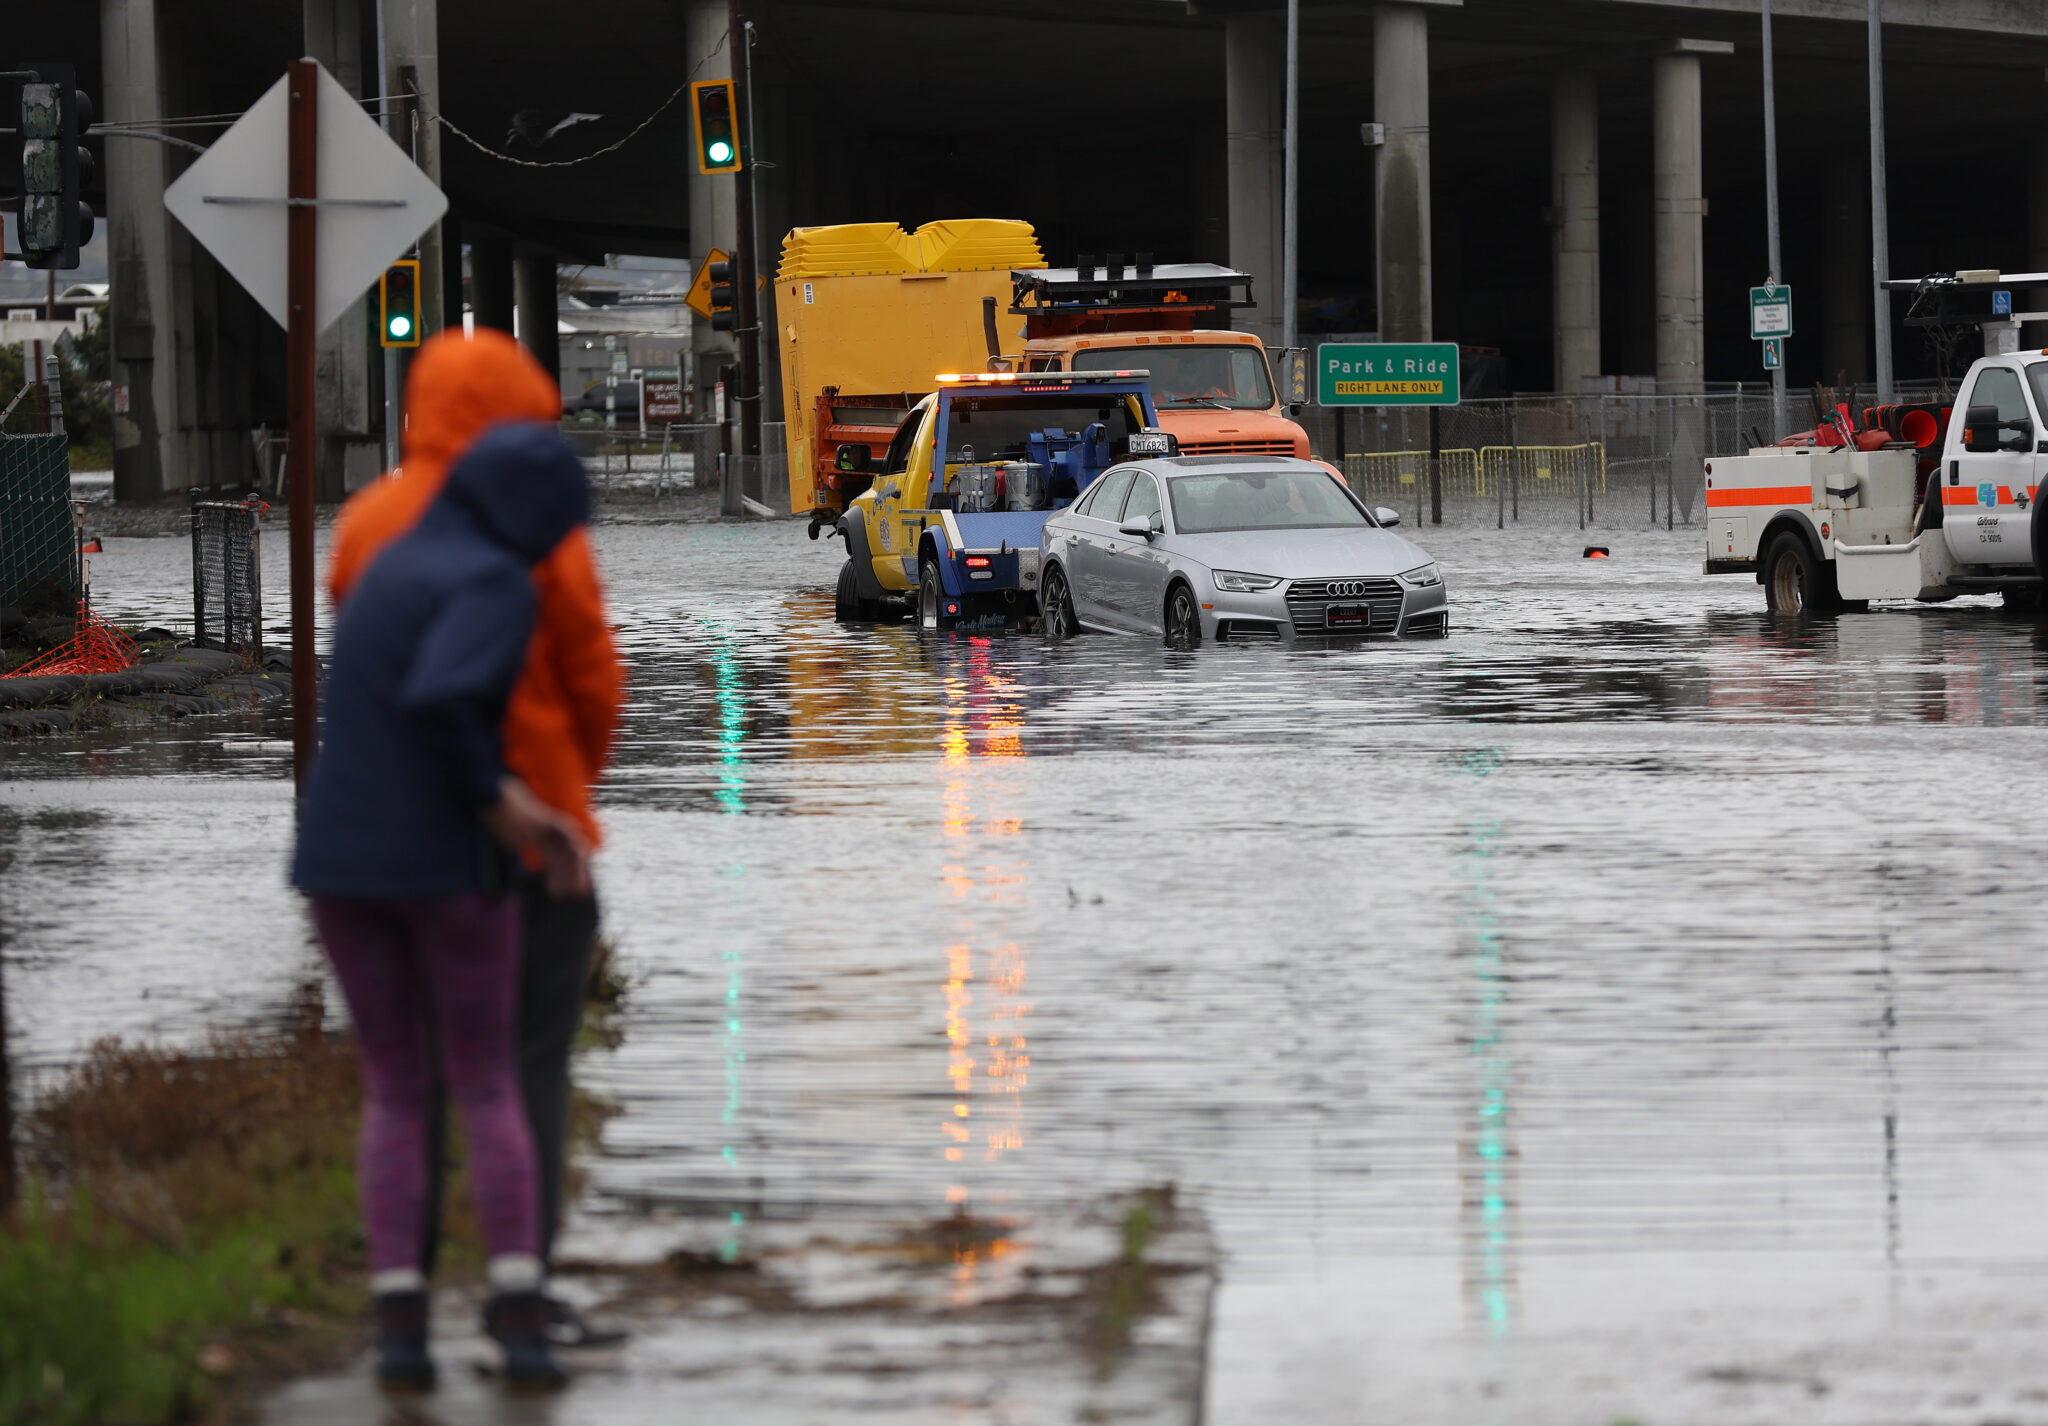 MILL VALLEY, CALIFORNIA - JANUARY 04: People look on as a tow truck pulls a car out of a flooded intersection on January 04, 2023 in Mill Valley, California. A massive storm is hitting Northern California bringing flooding rains and damaging wind (Photo by Justin Sullivan/Getty Images)